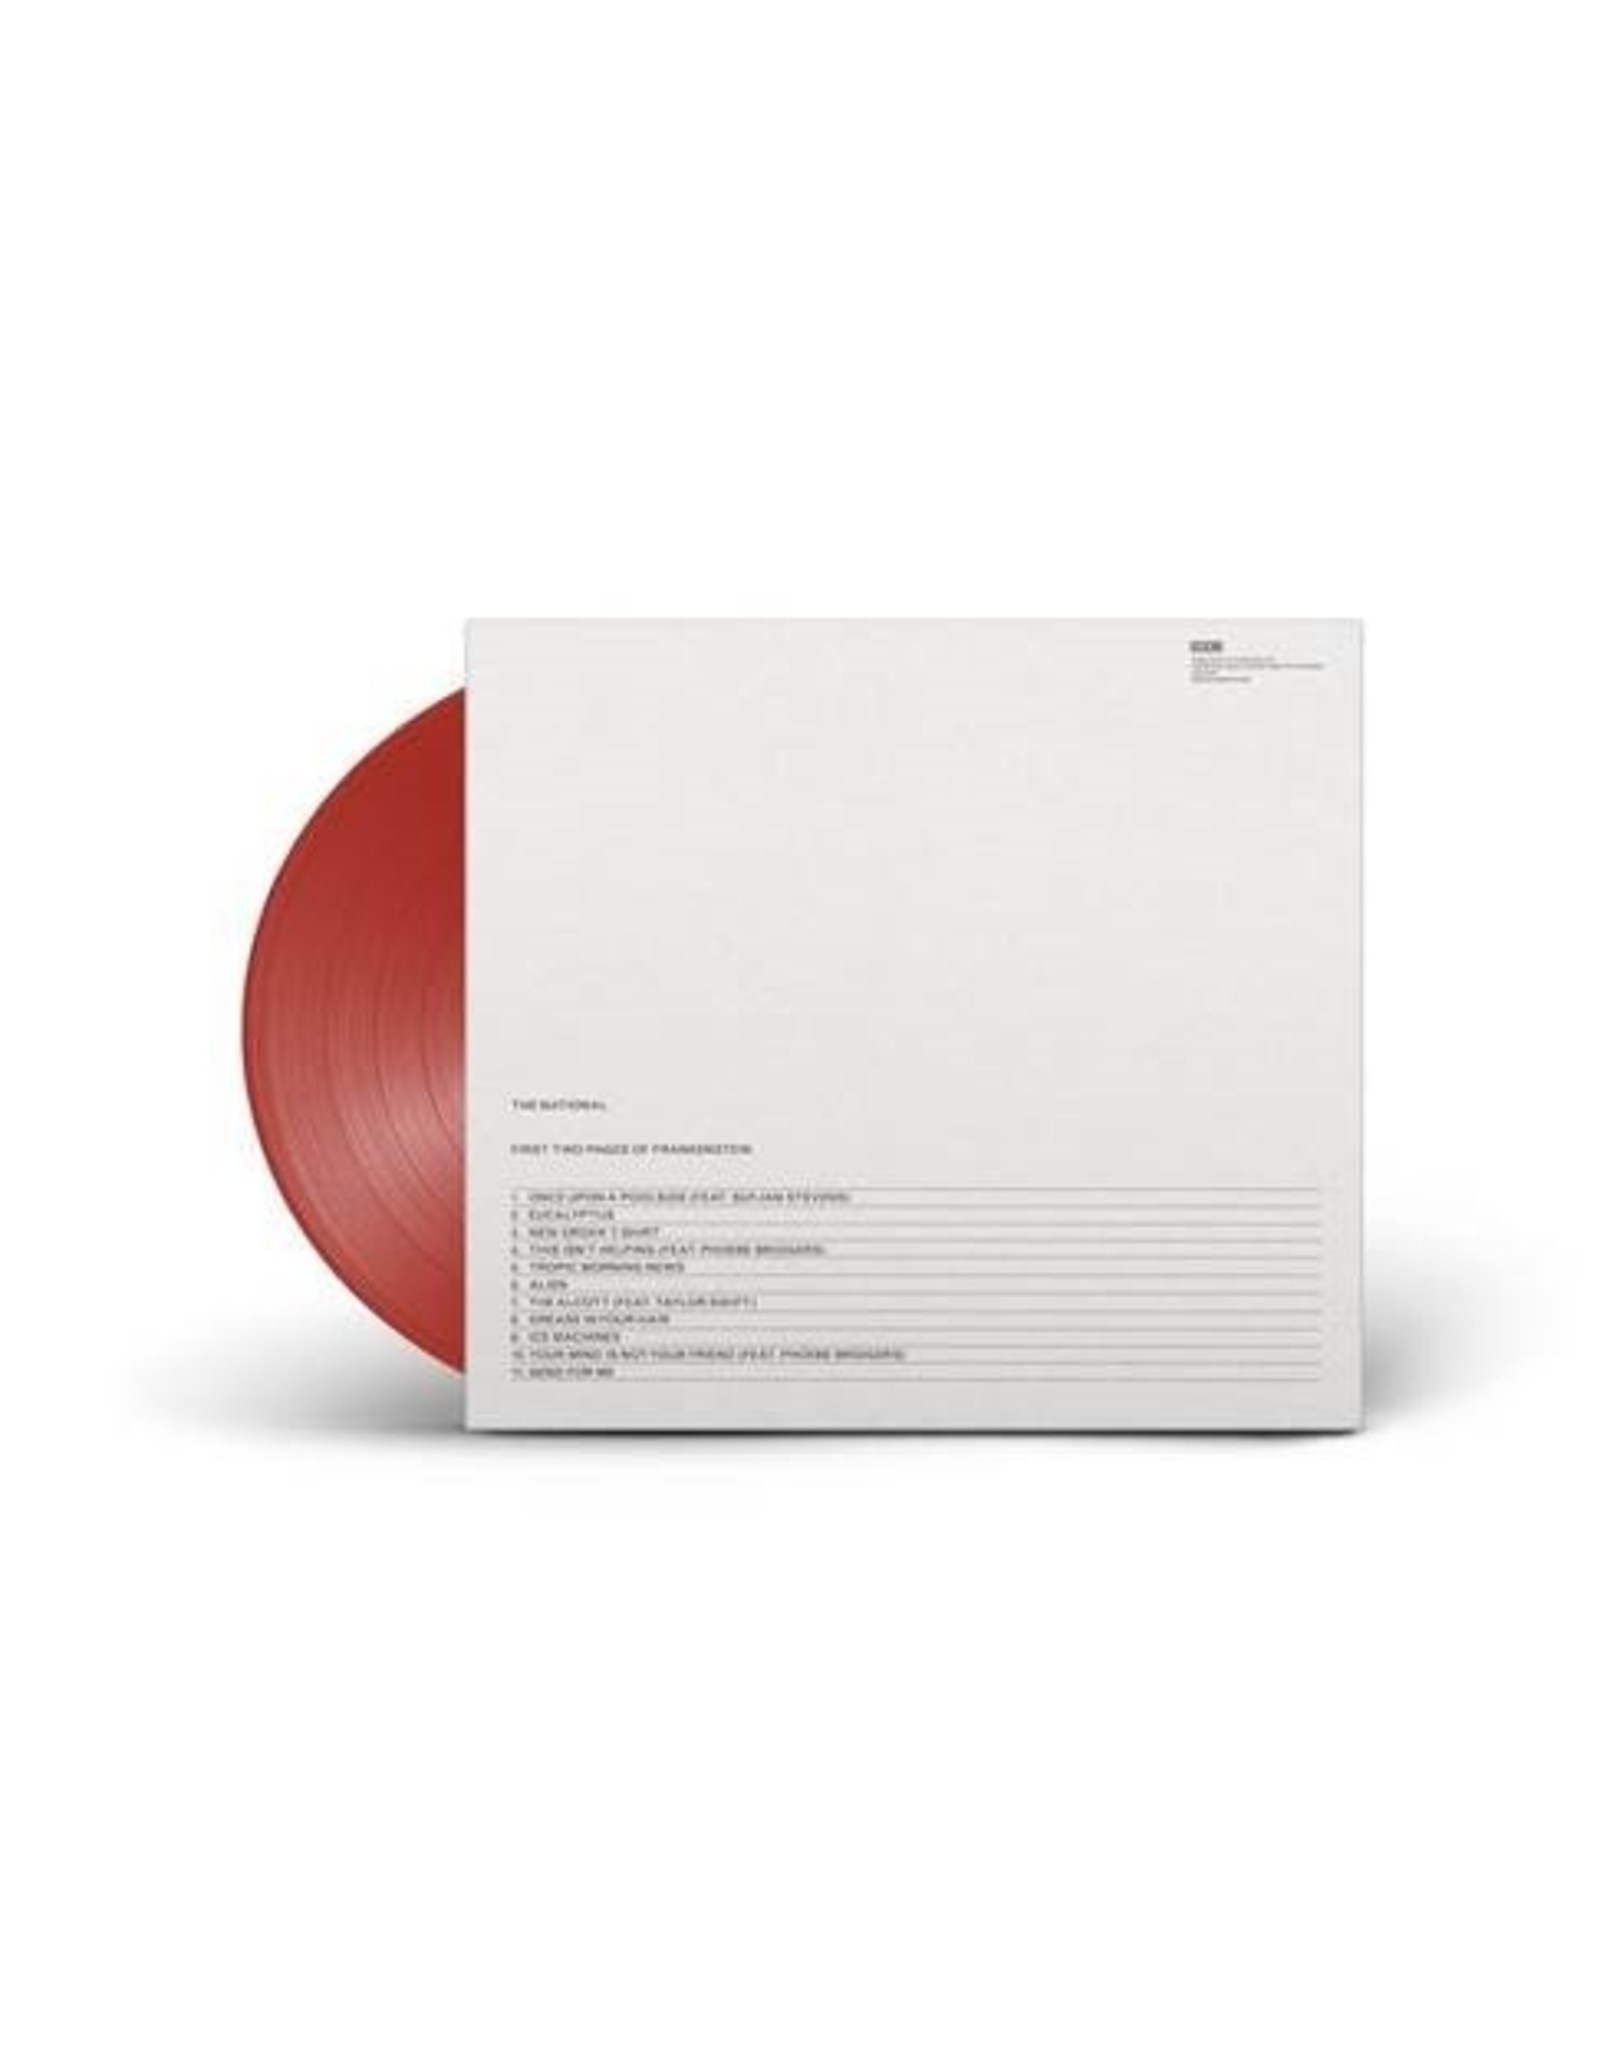 National - First Two Pages of Frankenstein  (Exclusive Red Vinyl)